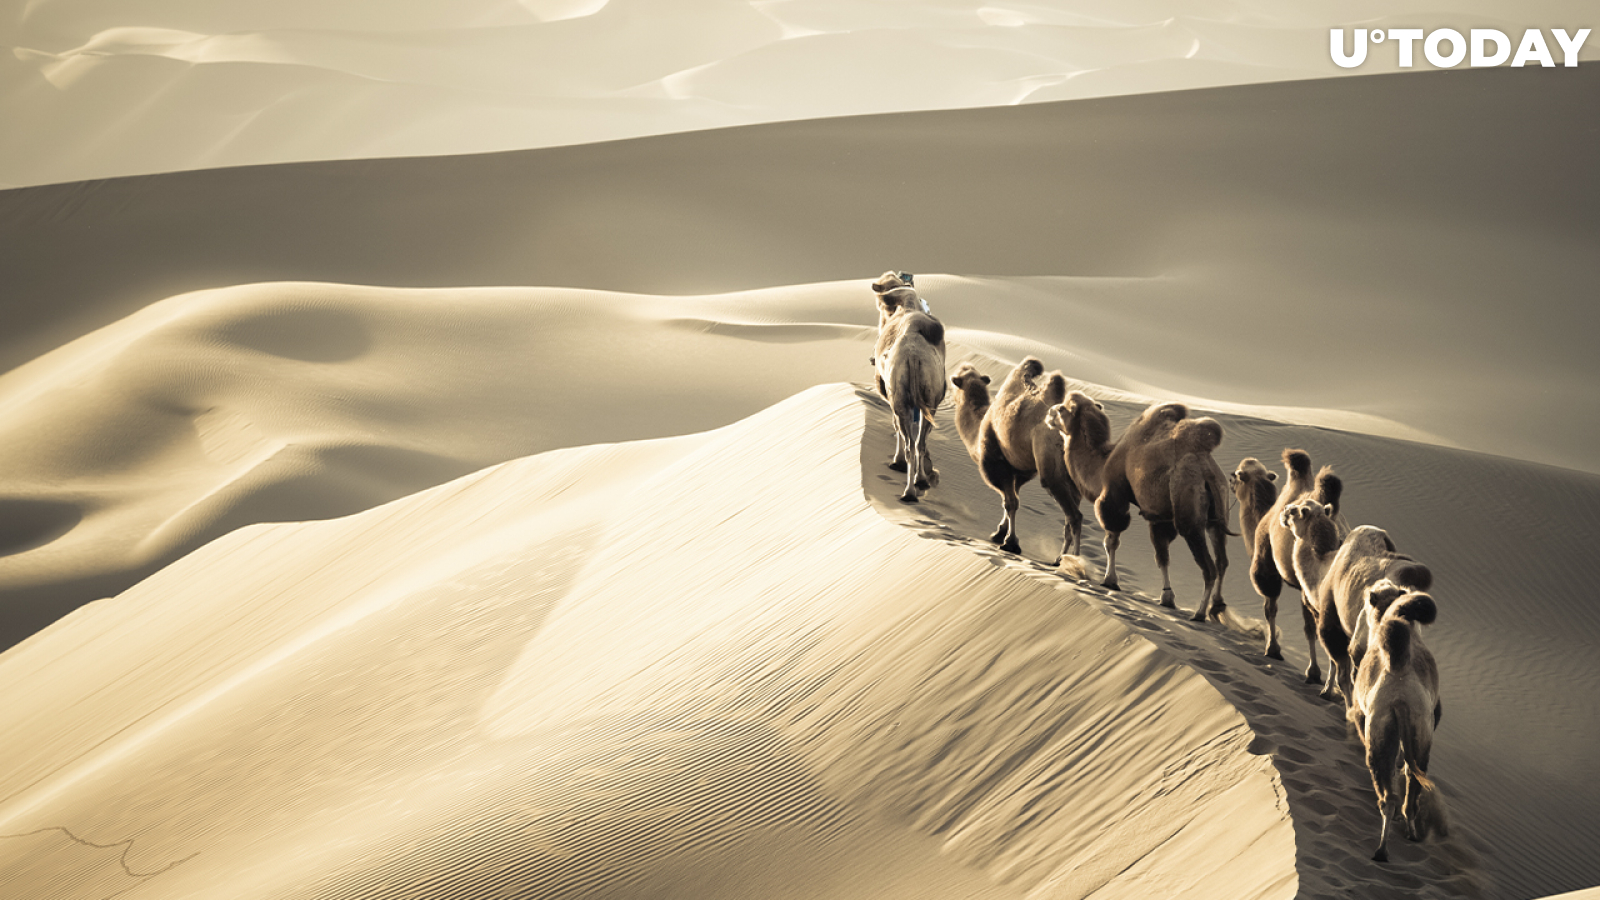 Silk Road Founder Supporters Distributed Native Token FREE: Details